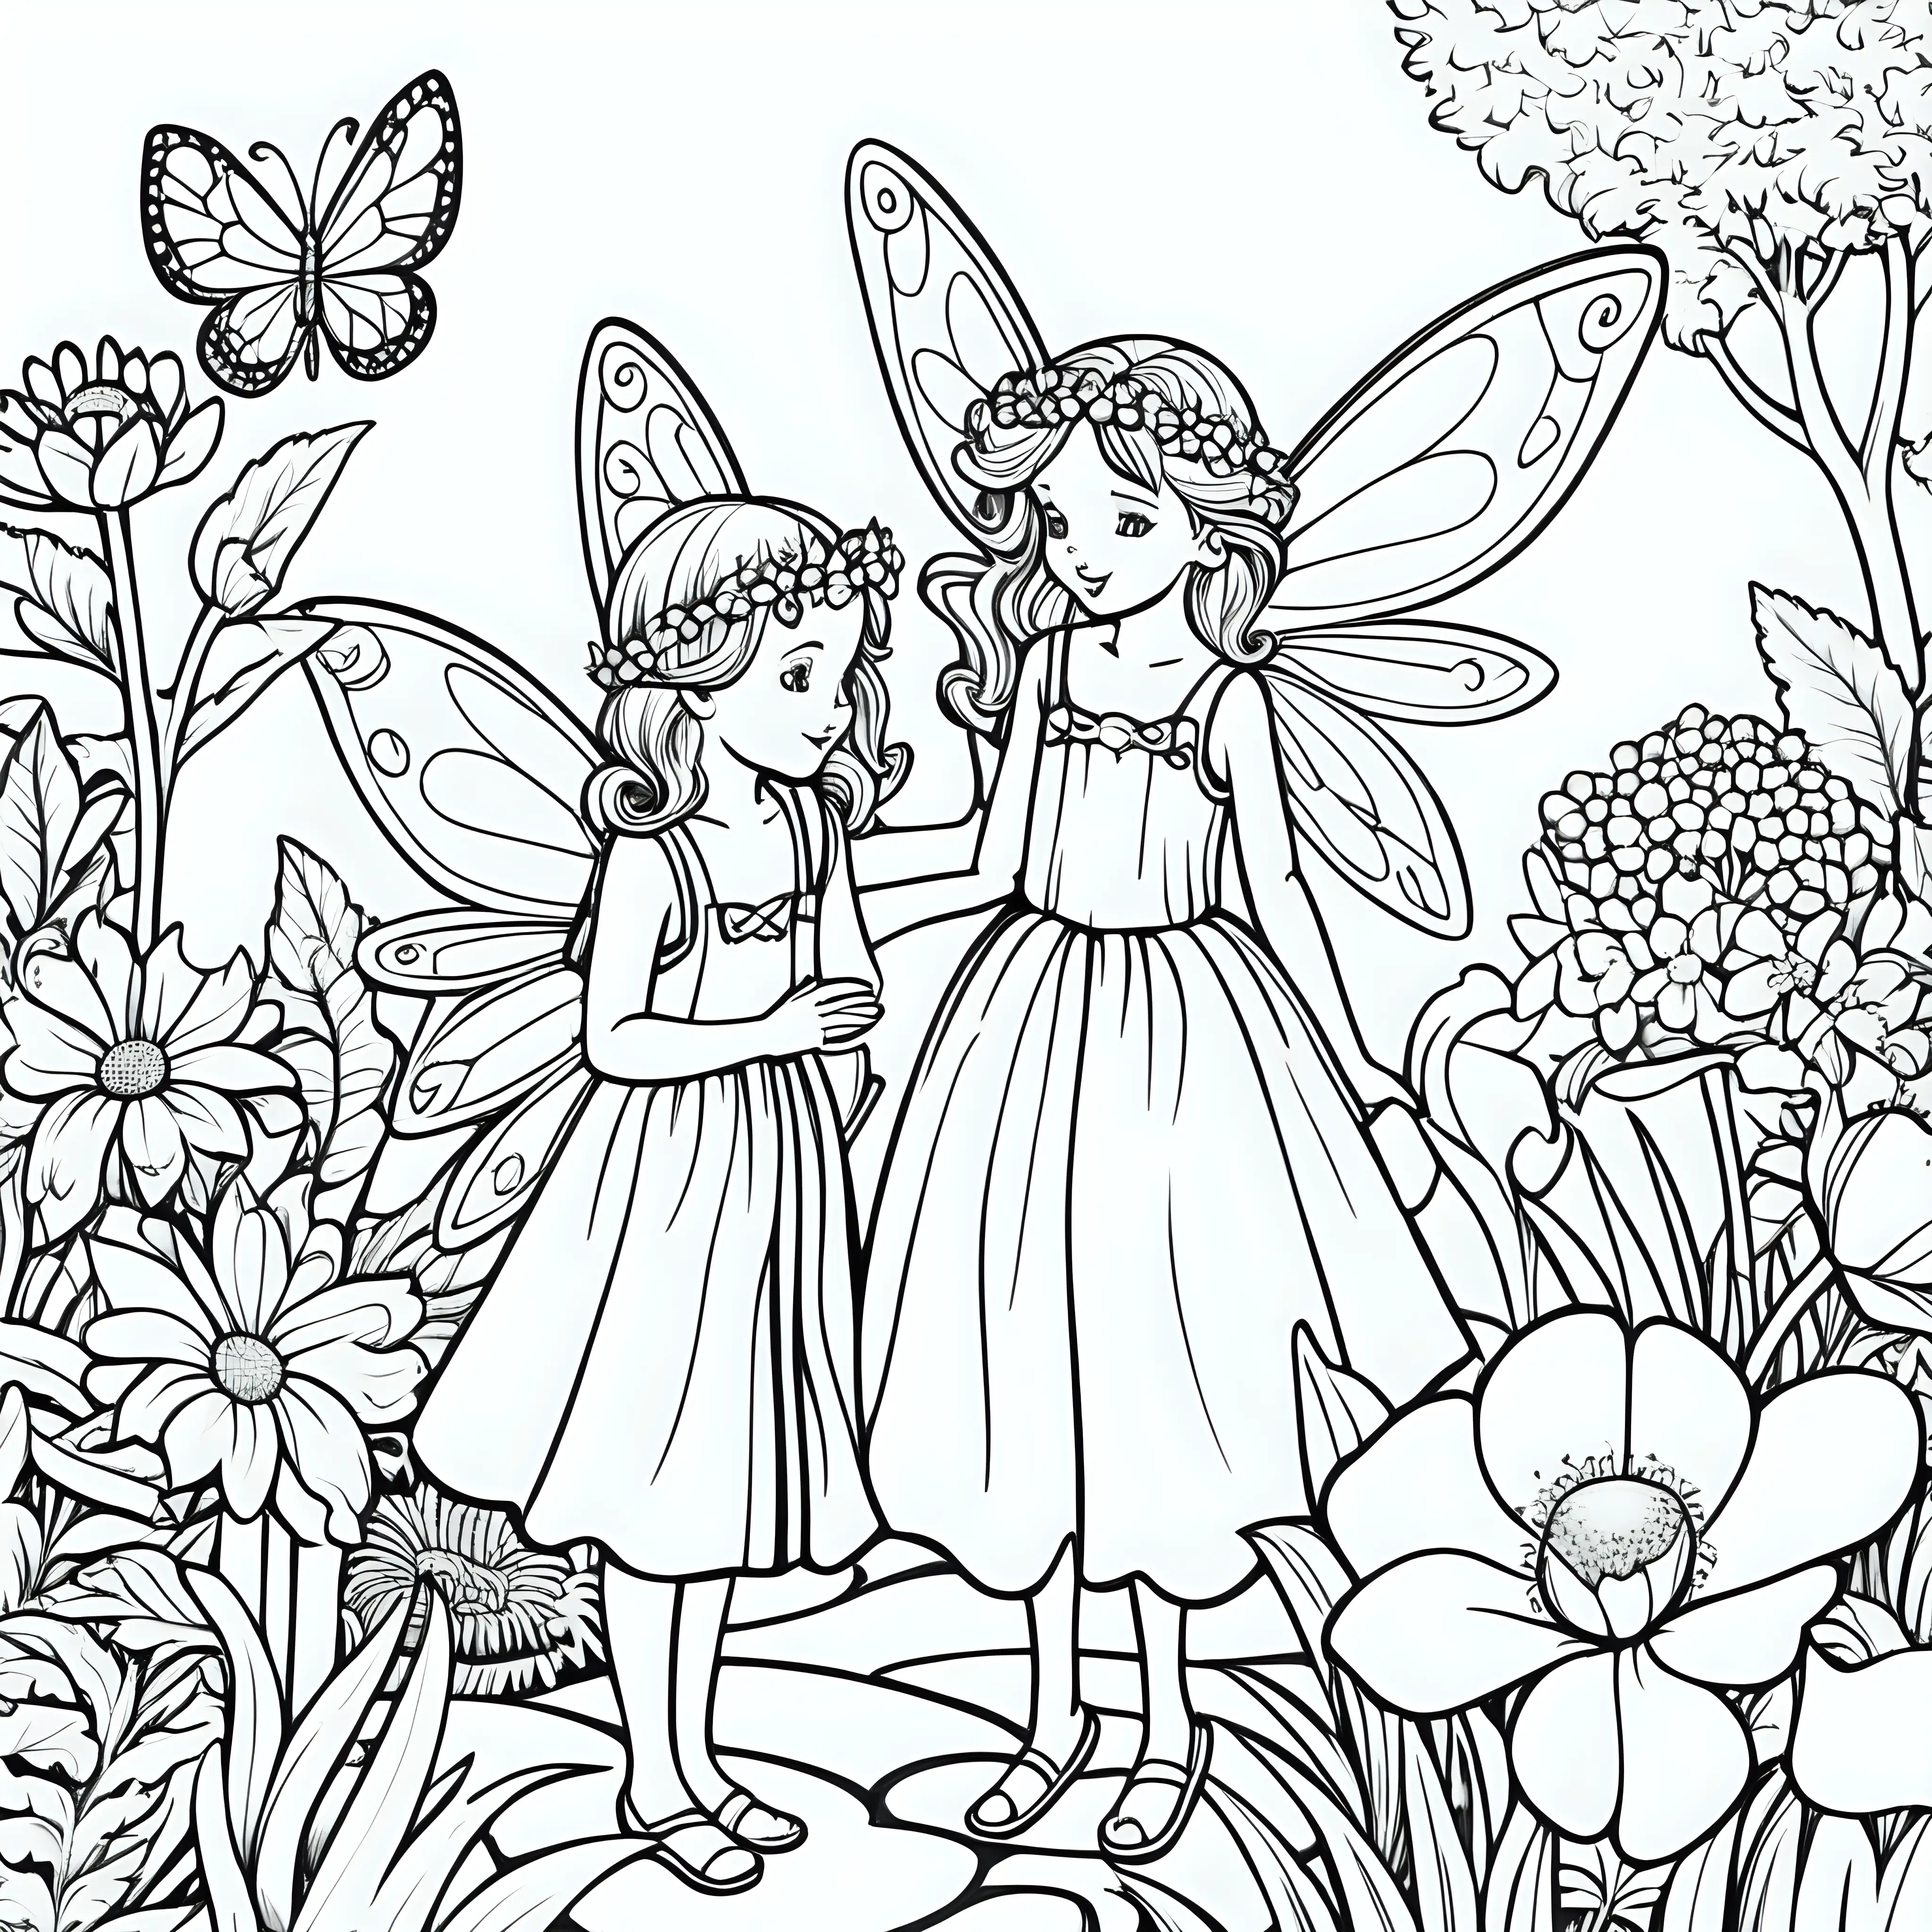 Enchanting Fairy Coloring Page in a Garden for Children